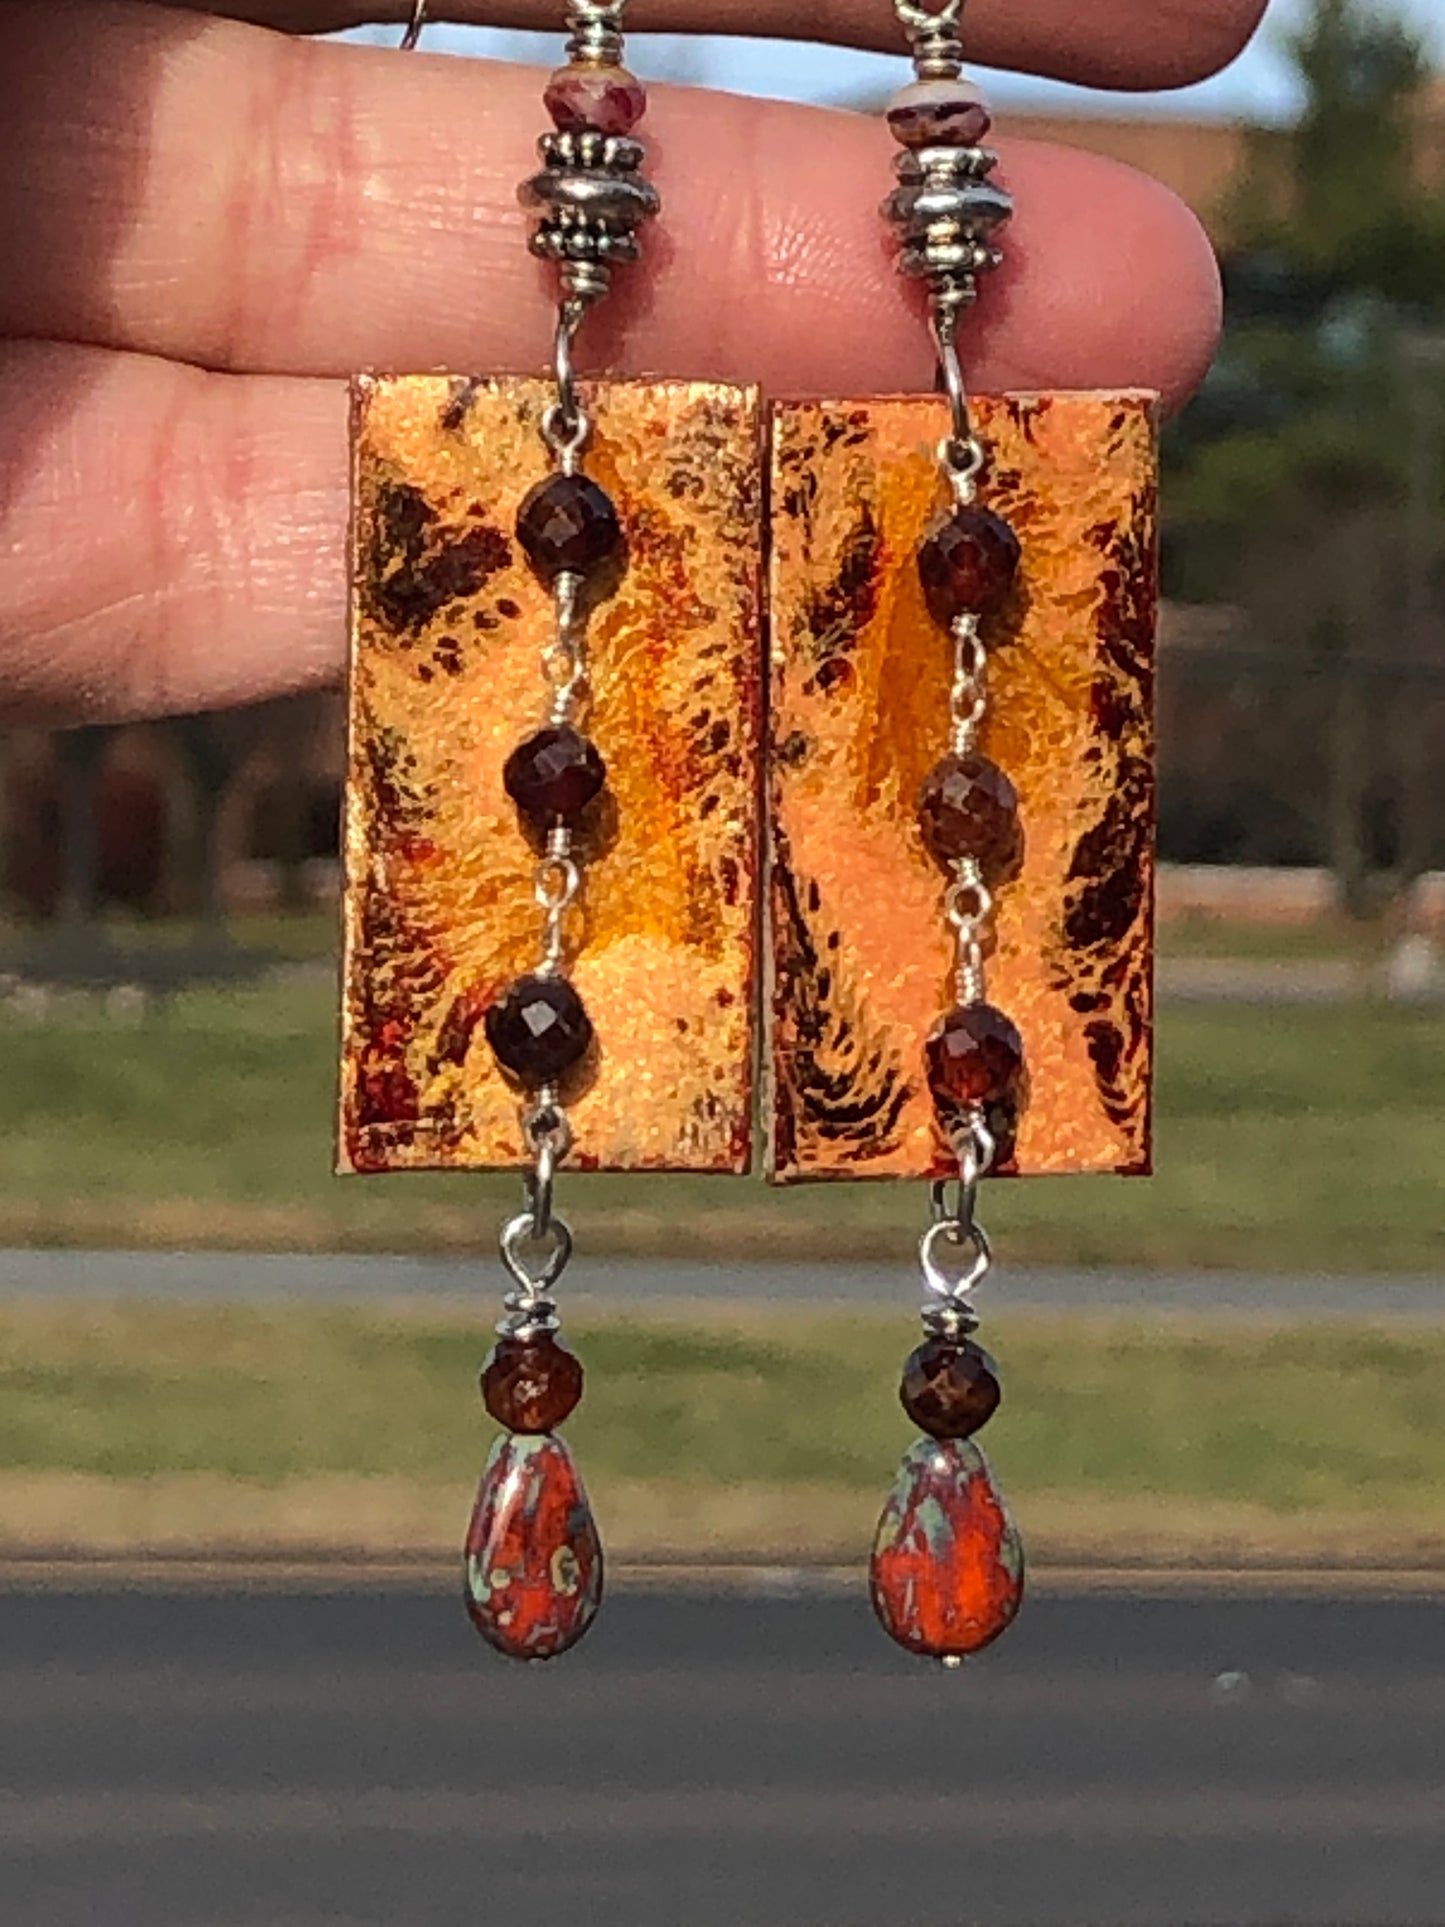 Hilo Hot, Paint Pour Earrings, Czech Beads and Faceted Garnets